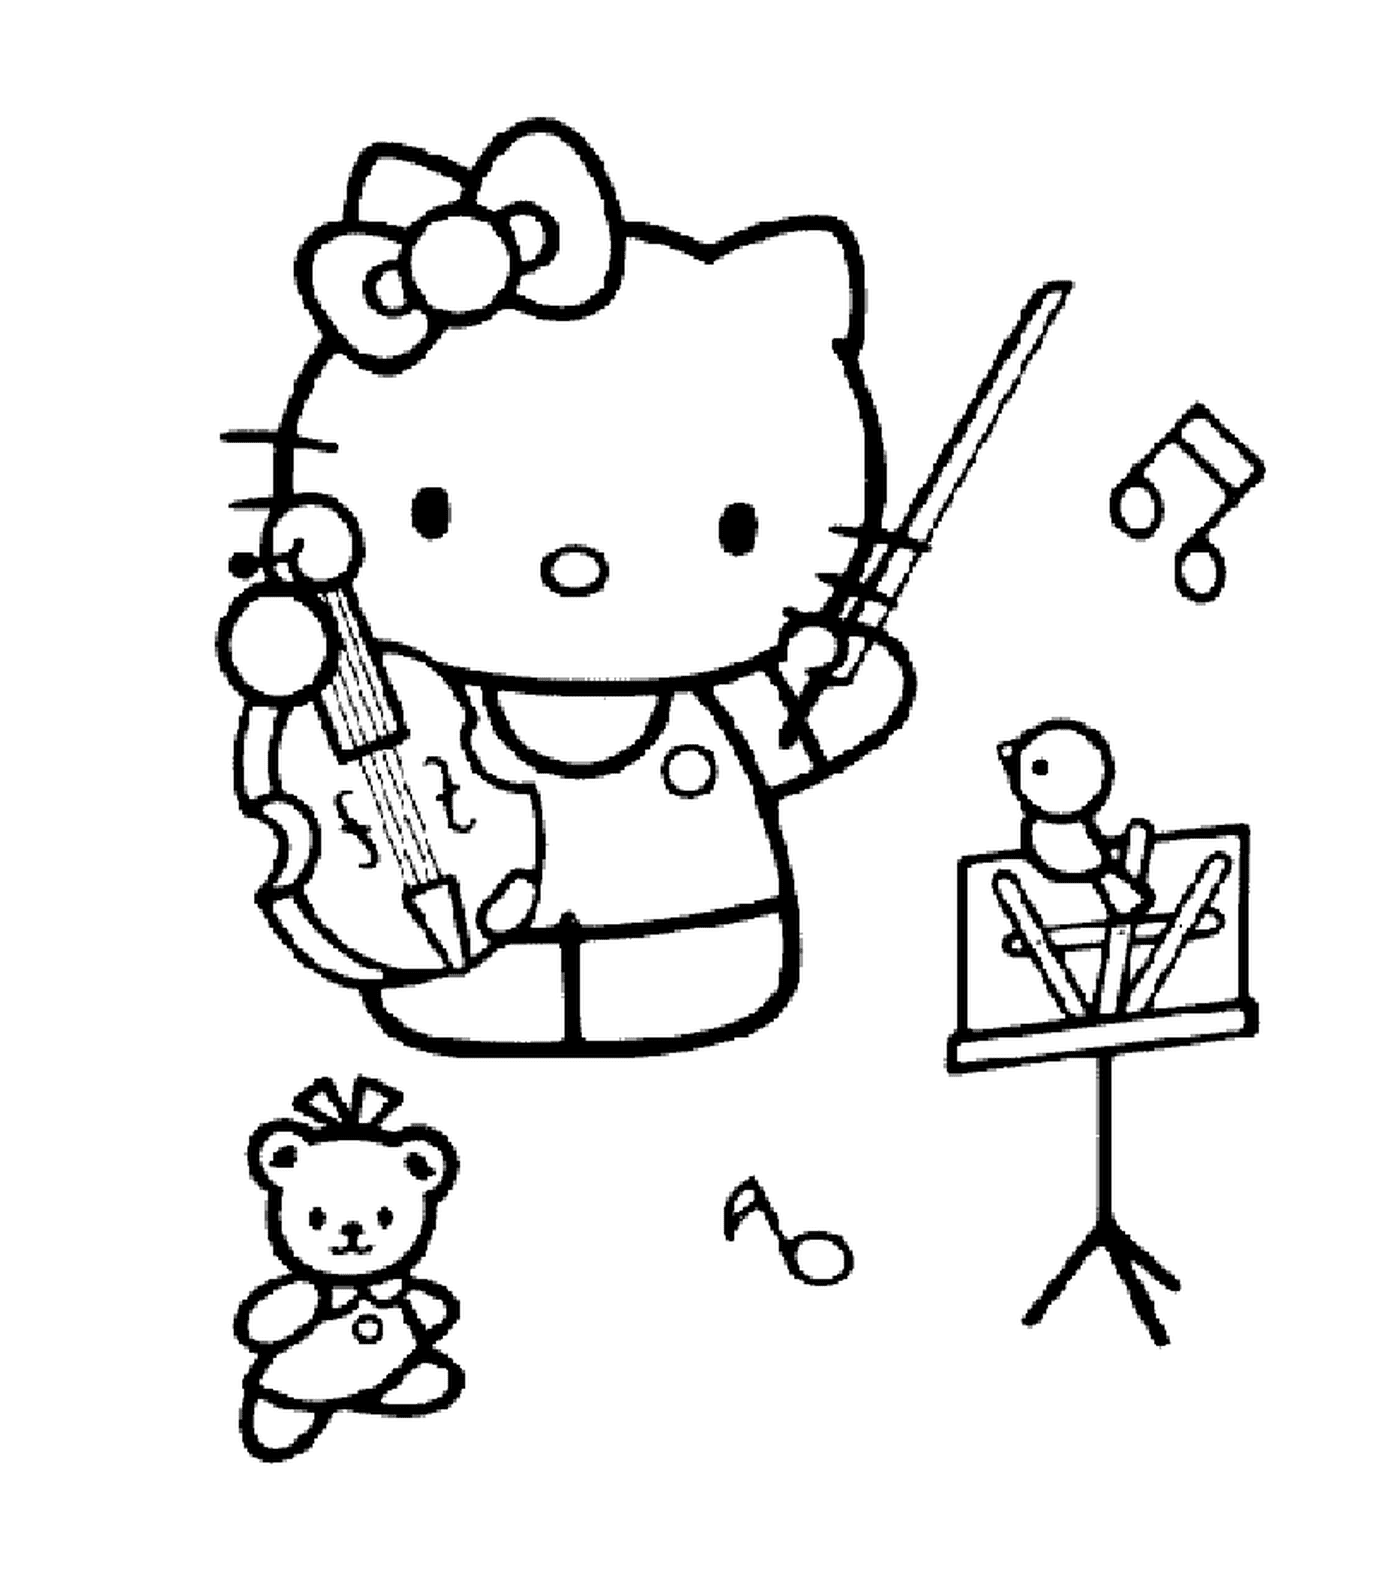  Hello Kitty playing a musical instrument 